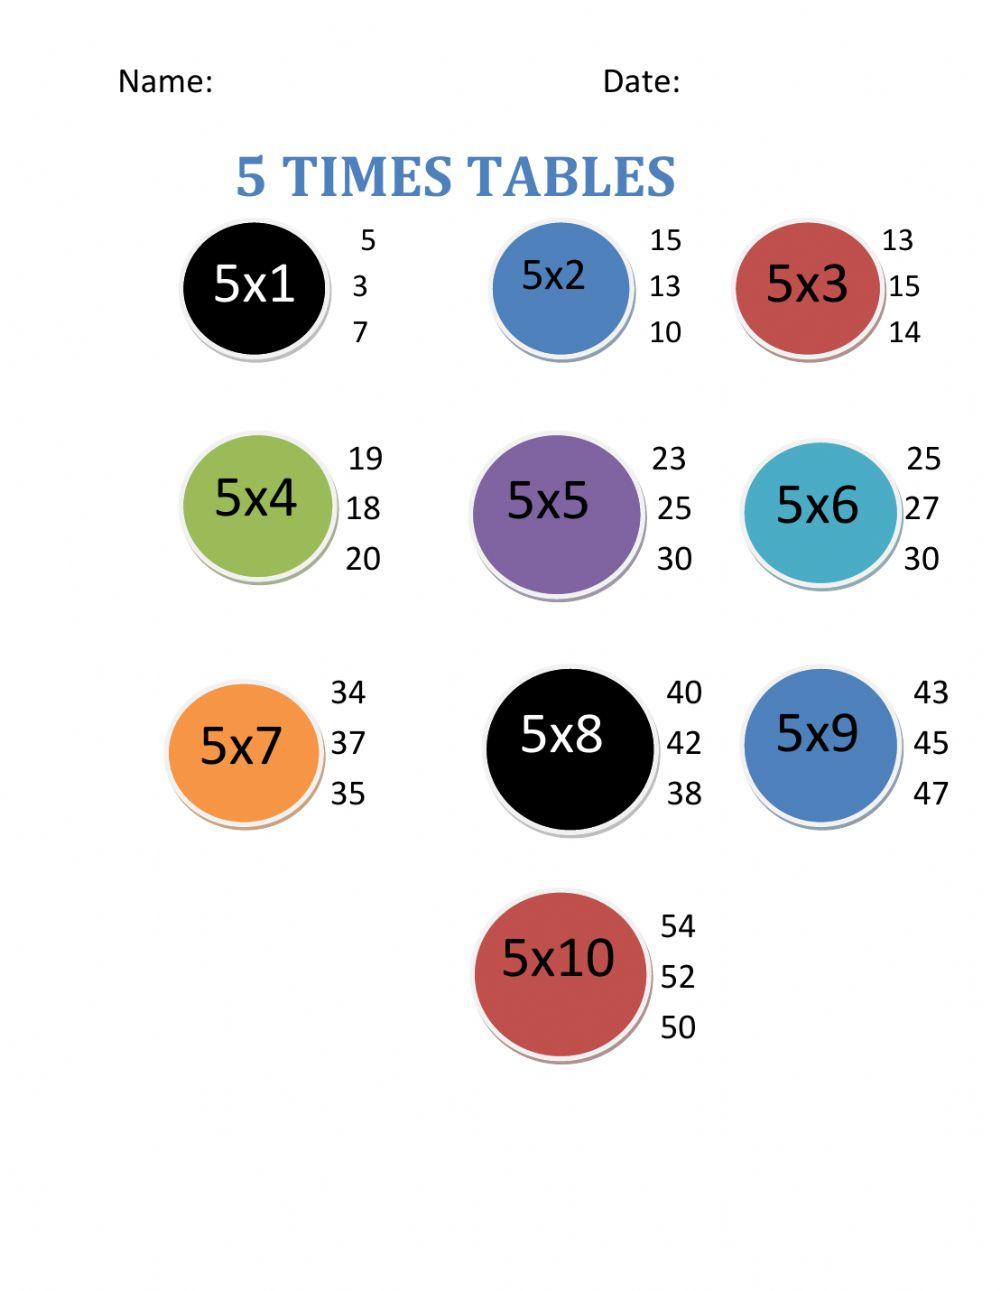 Times tables of 5